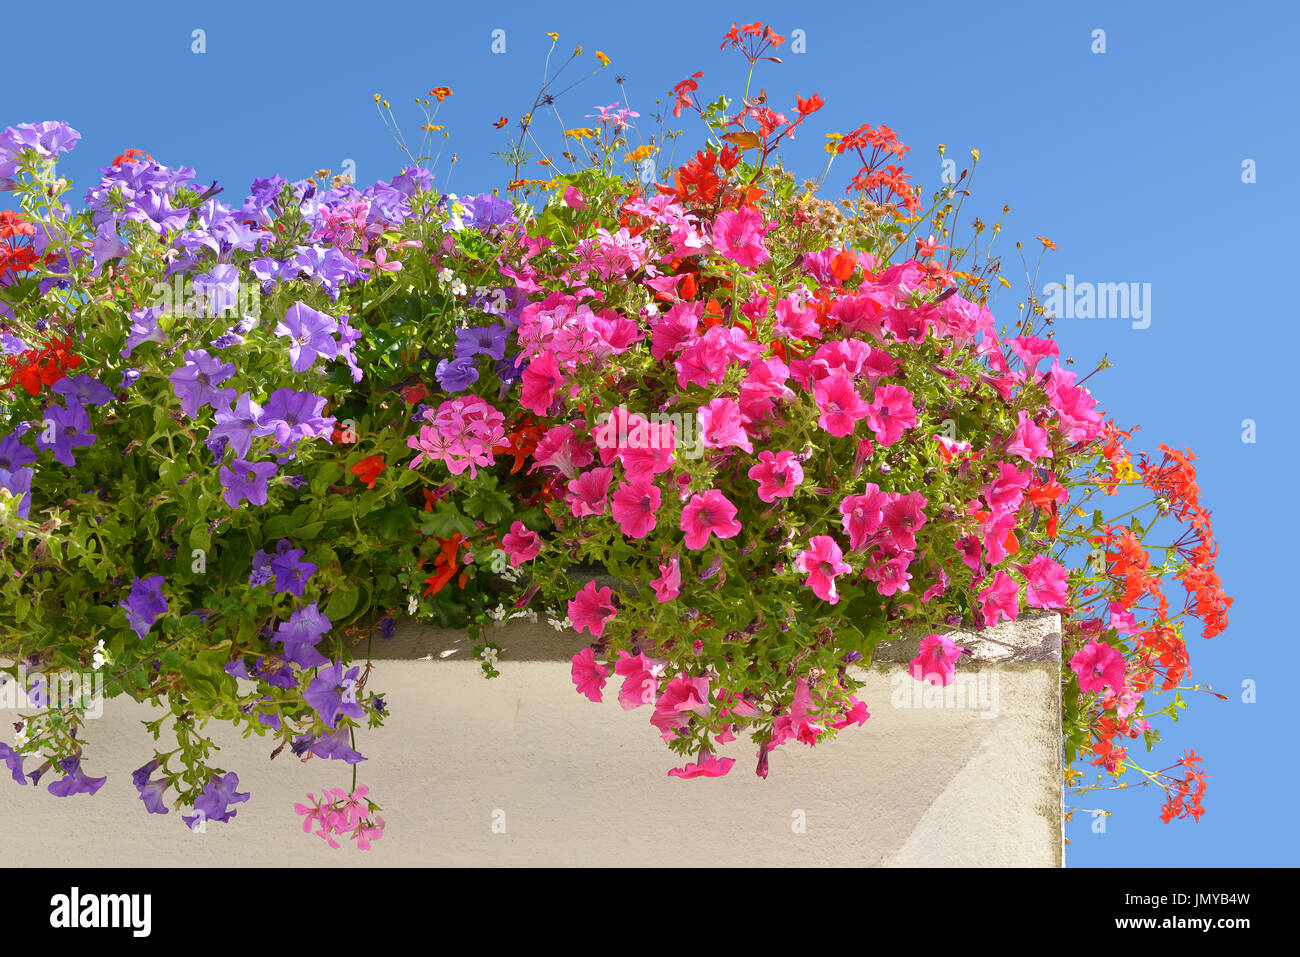 Flowering red and blue petunias on blue sky background Stock Photo